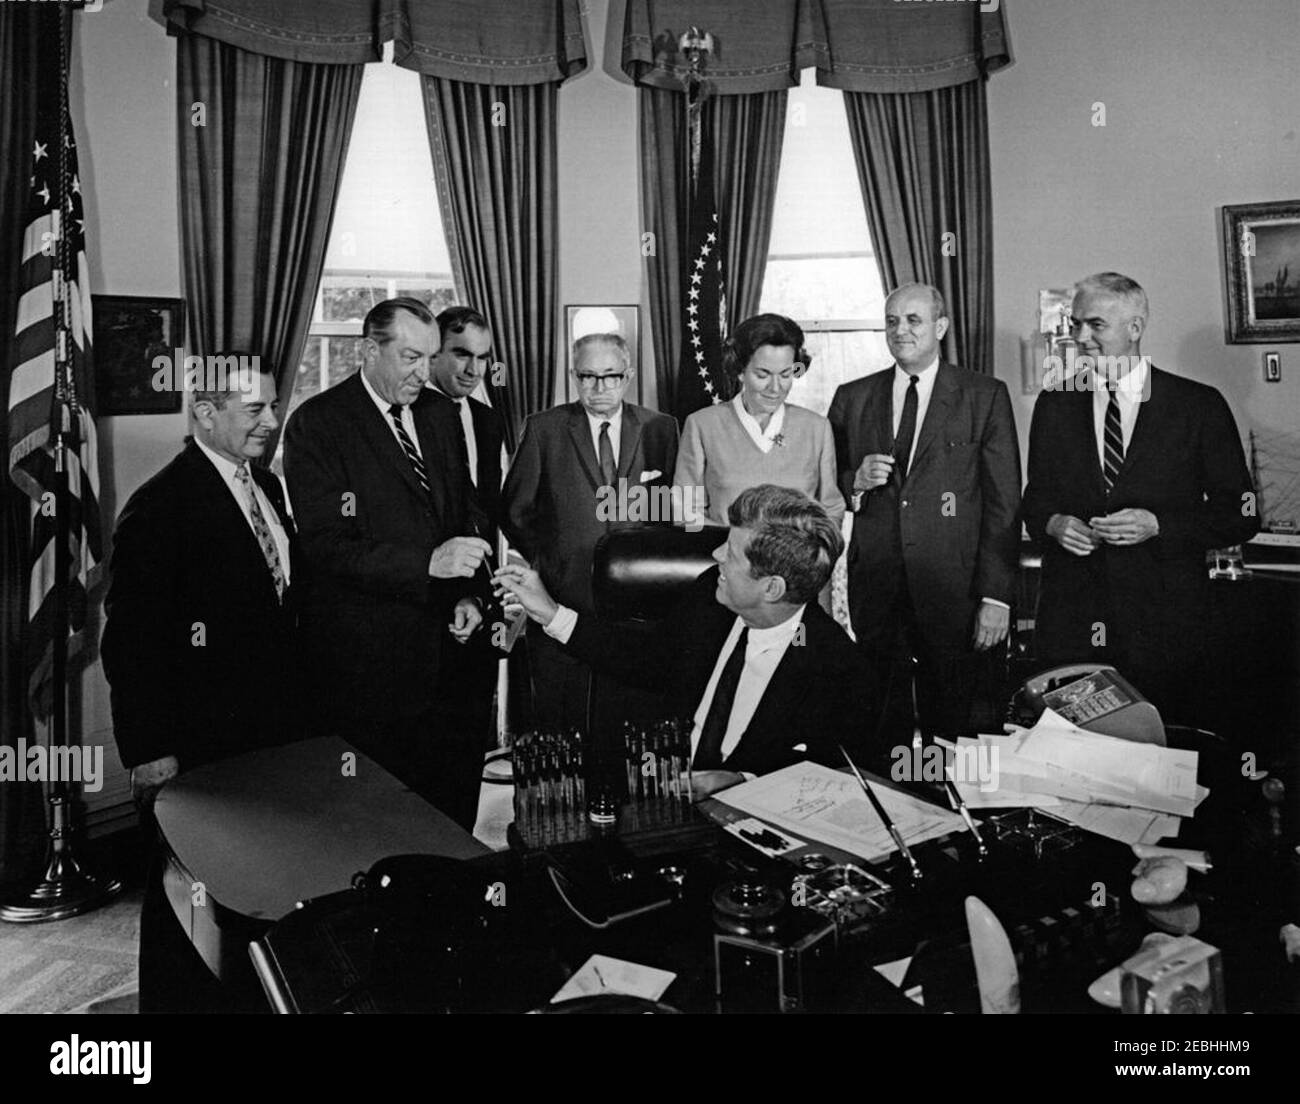 Bill signing - S. 1652, Amendment to the National Cultural Center Act , 12:00PM. President John F. Kennedy (seated at desk) hands a pen to Representative Robert E. Jones (Alabama) after signing a bill to amend the National Cultural Center Act. Standing (L-R): General Counsel and member of the Board of Trustees for the National Cultural Center, Ralph E. Becker; Representative Jones; Representative James C. Wright, Jr. (Texas); Representative Charles A. Buckley (New York); Representative Charlotte T. Reid (Illinois); Chairman of the Board of Trustees for the National Cultural Center, Roger L. St Stock Photo